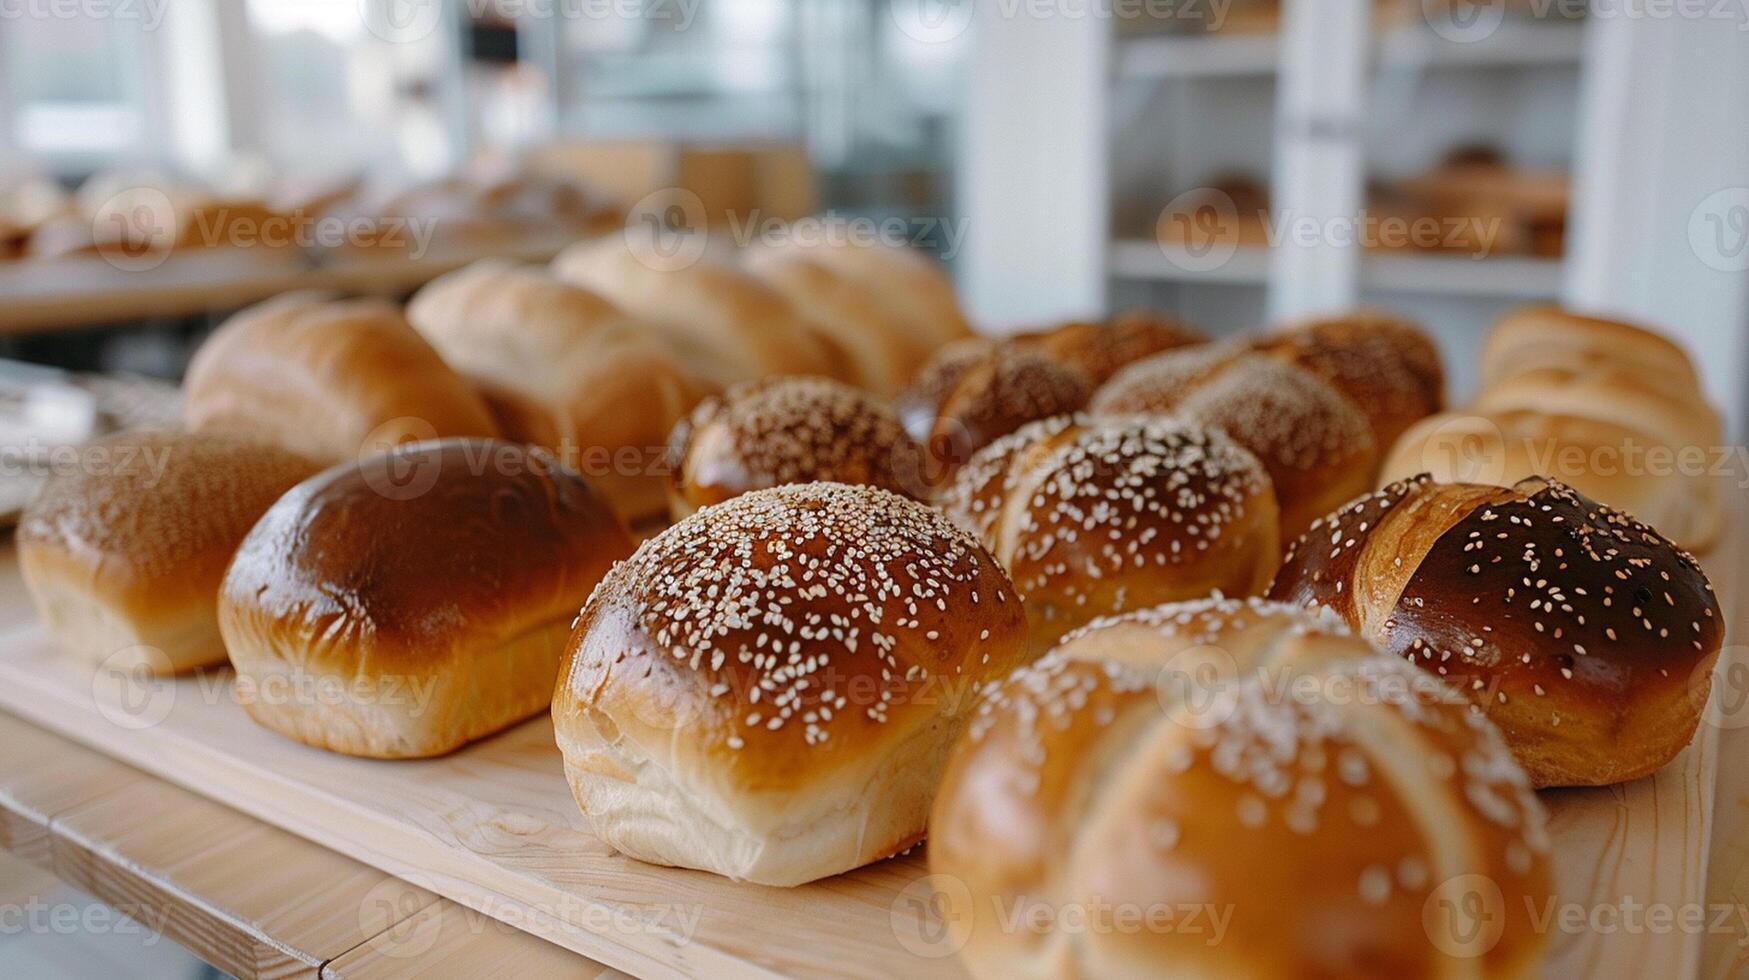 Assortments of tasty buns on a light wooden table in a bakery. photo